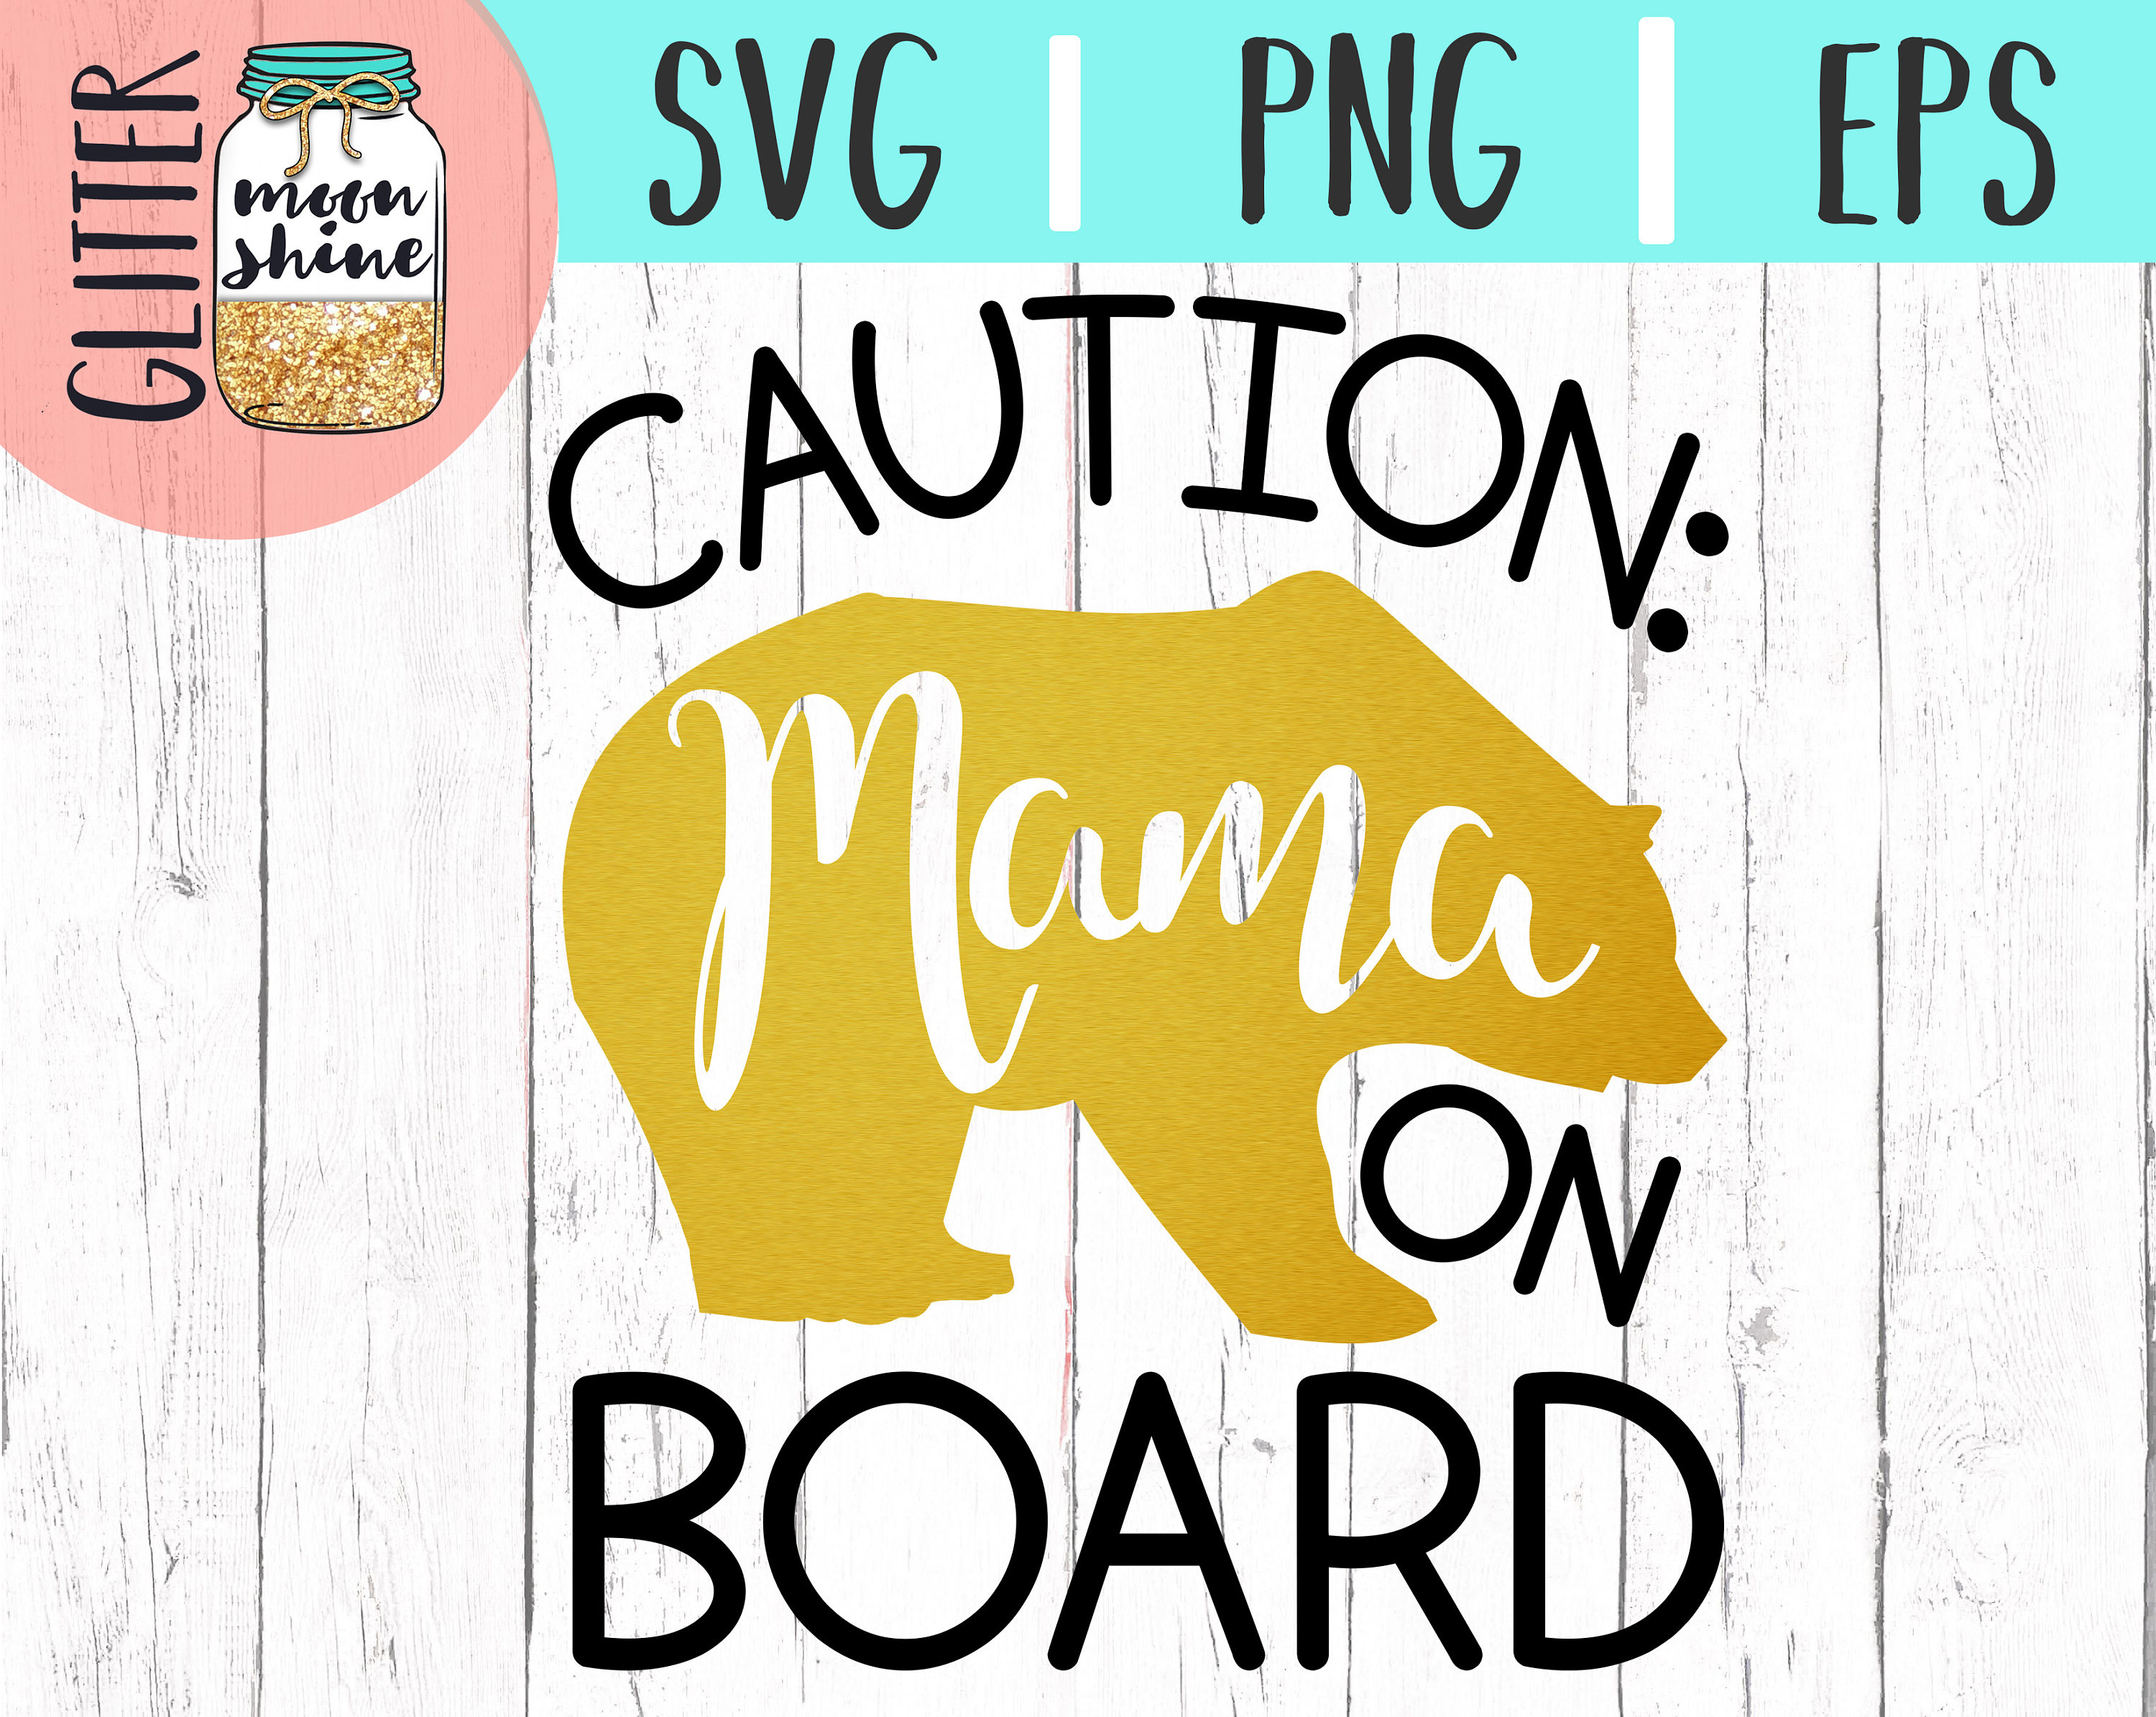 Free Free Mama&#039;s Favorite Human Svg 939 SVG PNG EPS DXF File